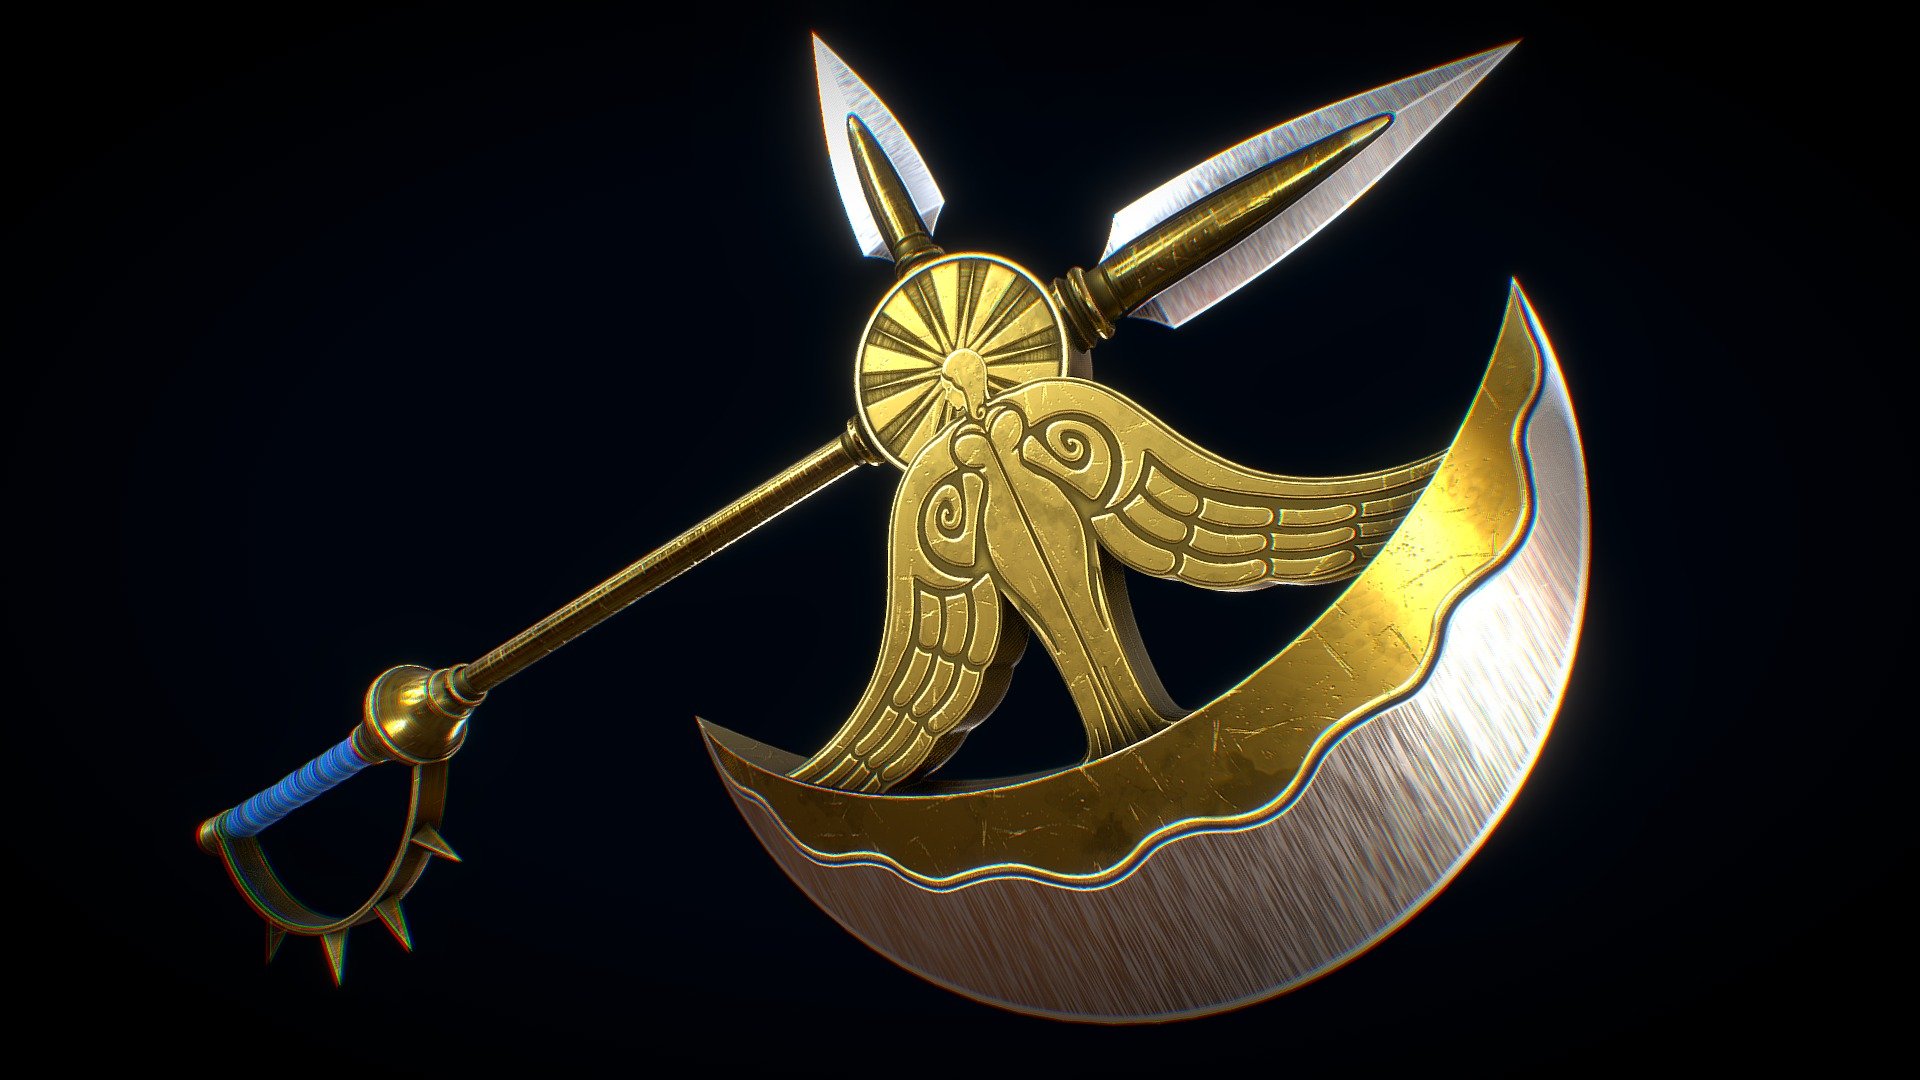 Low-poly 3D model of Divine axe Rhitta. The Divine Axe Rhitta「神斧 リッタ, Jinpu Ritta」is a Sacred Treasure that was in the possession of the Lion's Sin of Pride, Escanor 3d model